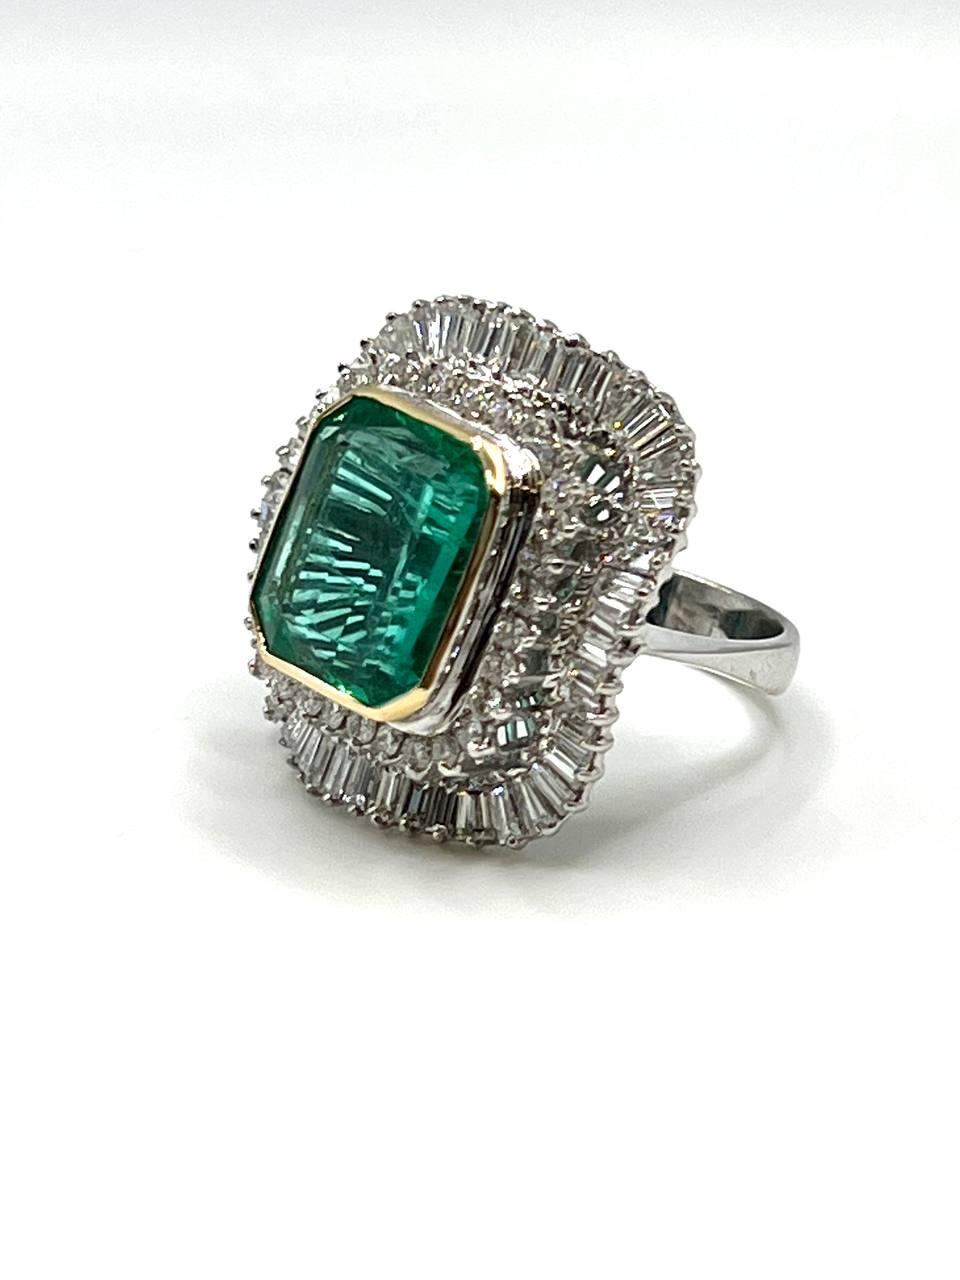 an elegant emerald and diamond ring , set at the center with 8.00 carats Colombian emerald in a surround of round brilliant-cut diamonds and baguette-cut diamonds ( circa 4 carats )
mounted in 18k gold , circa 1950s.
this piece is accompanied by a